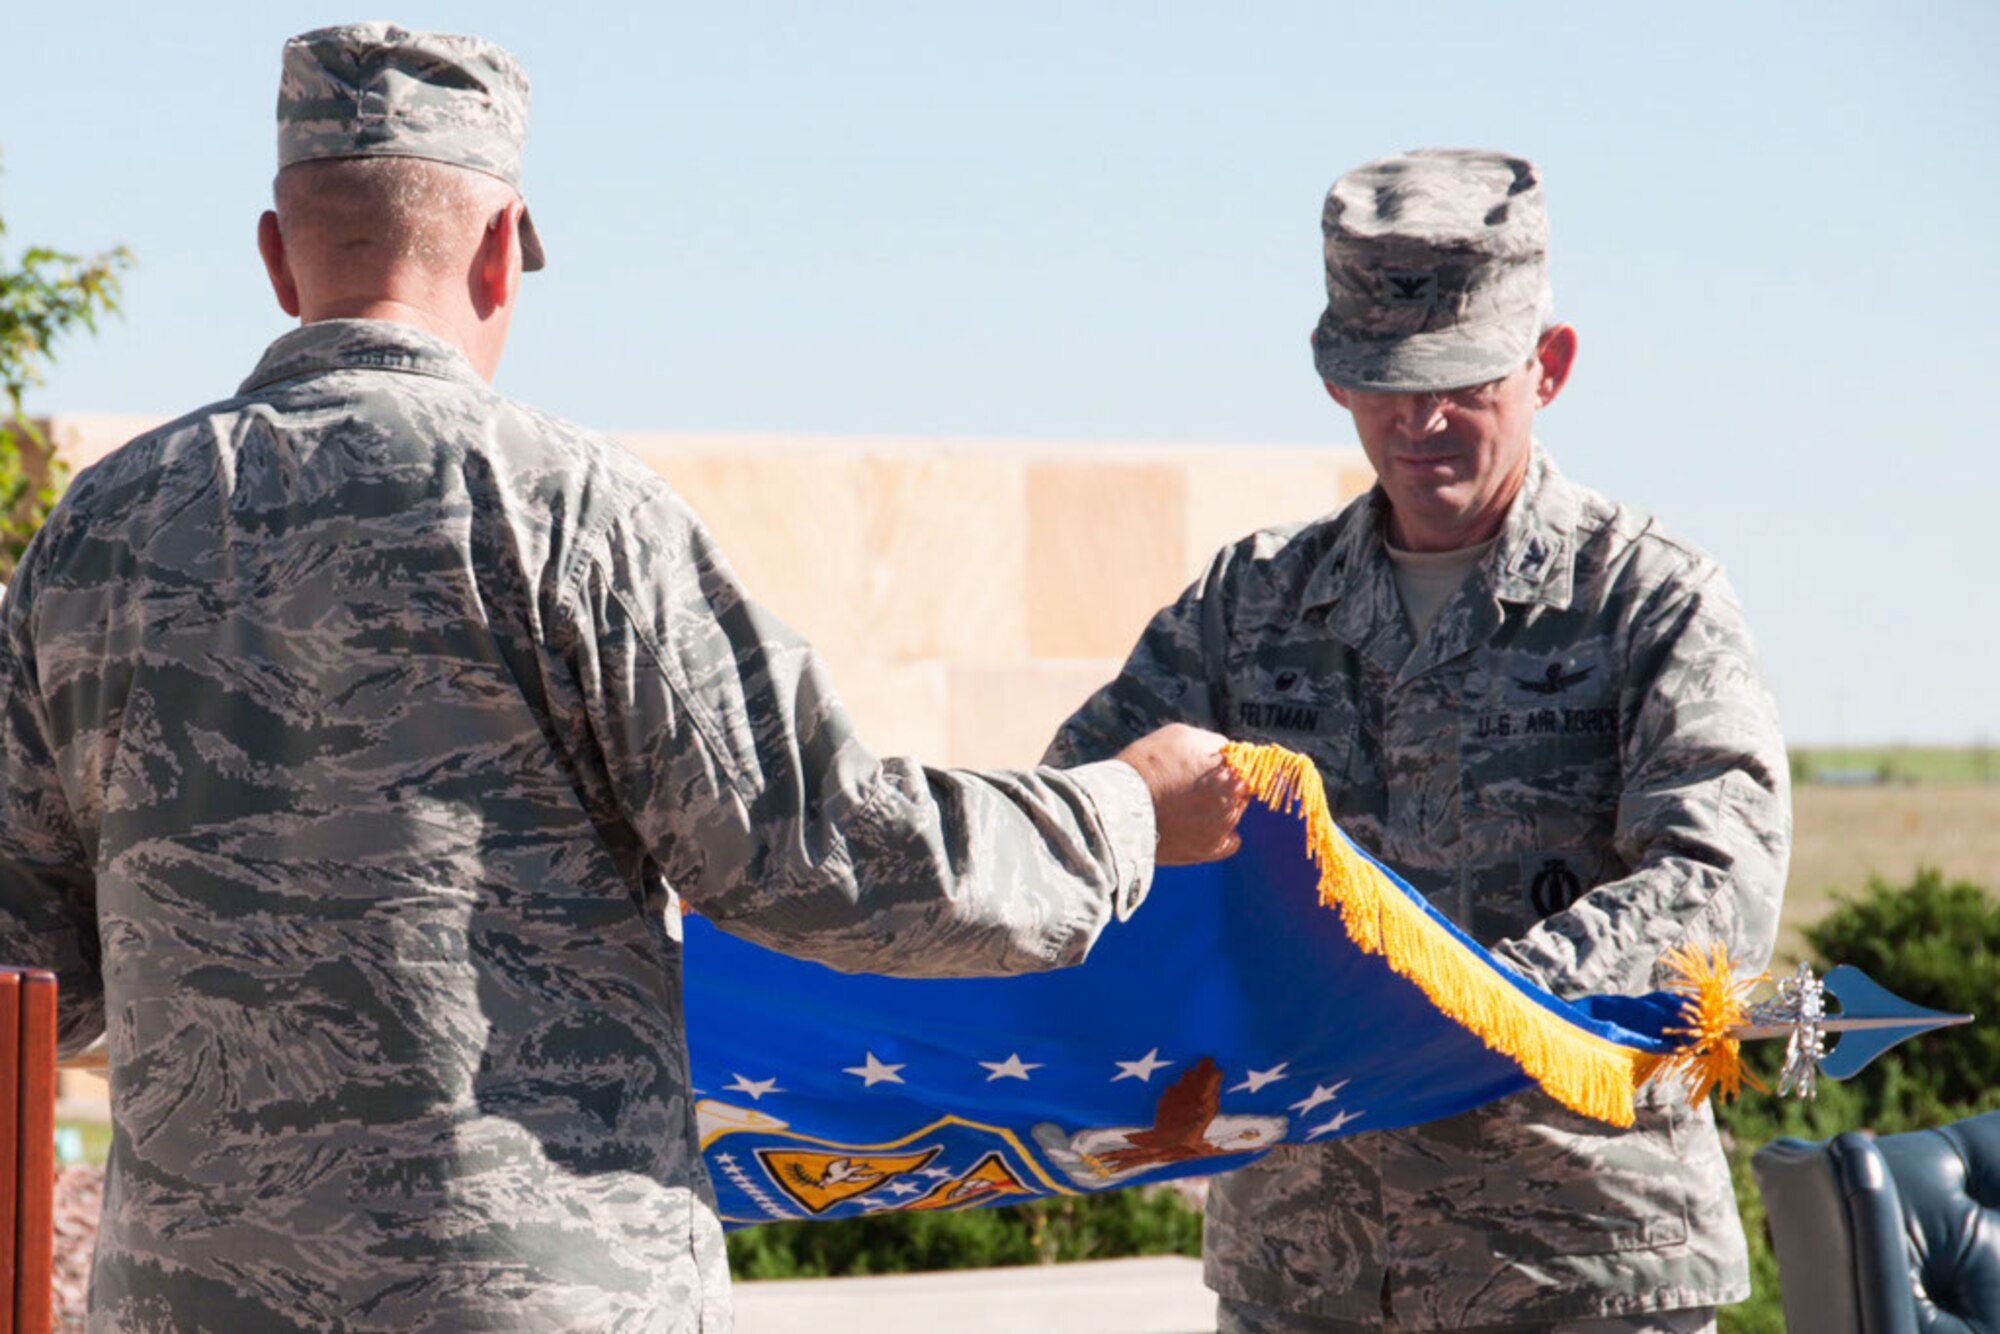 Col. Damon Feltman, 310th Space Wing commander, and Col. Neal Landeen, 310th Mission Support Group commander unfurl the Mission Support Group colors to be placed in the unit’s new home at the 310th Space Wing Headquarters building on Schriever AFB, Colo., Aug. 7, 2016.